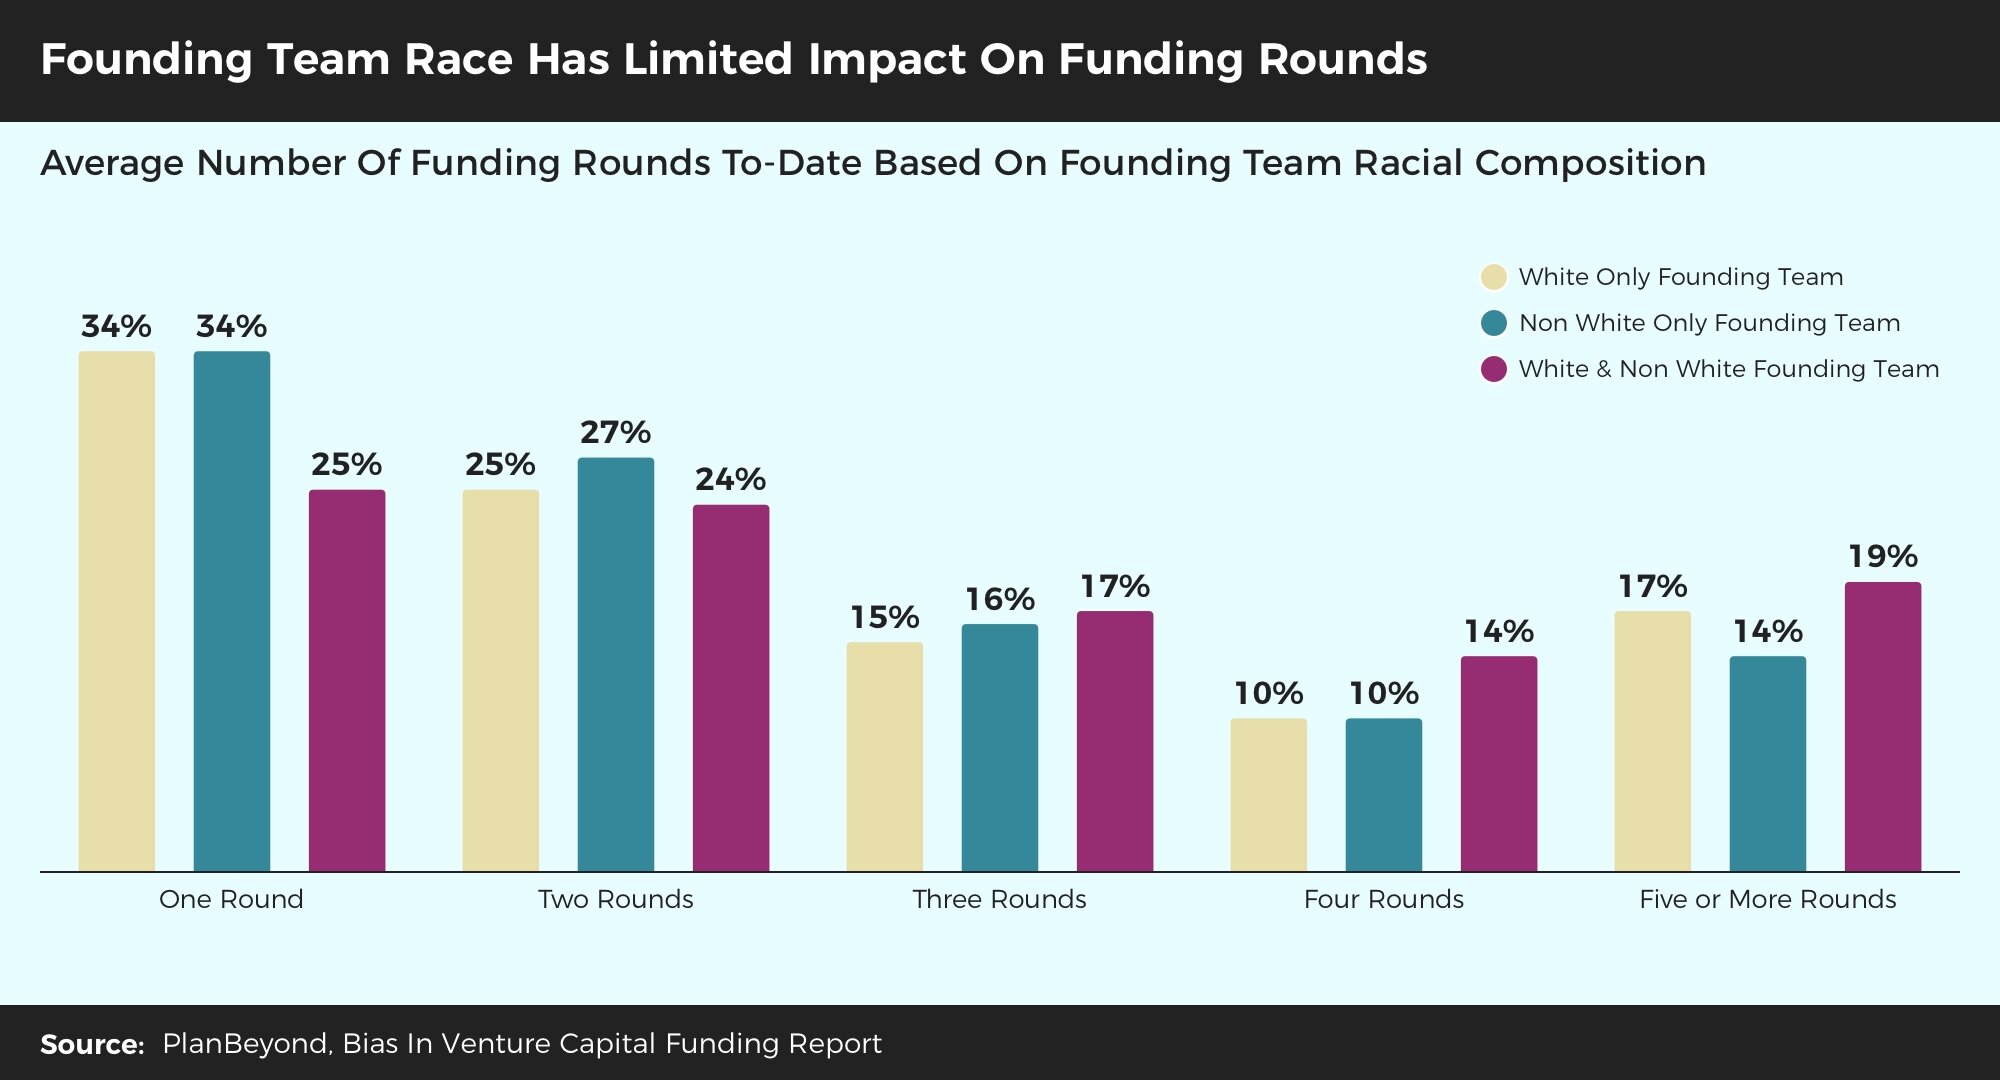 Bias+In+Venture+Funding+Report+-+Founding+Team+Race+Little+Impact+On+Funding+Rounds